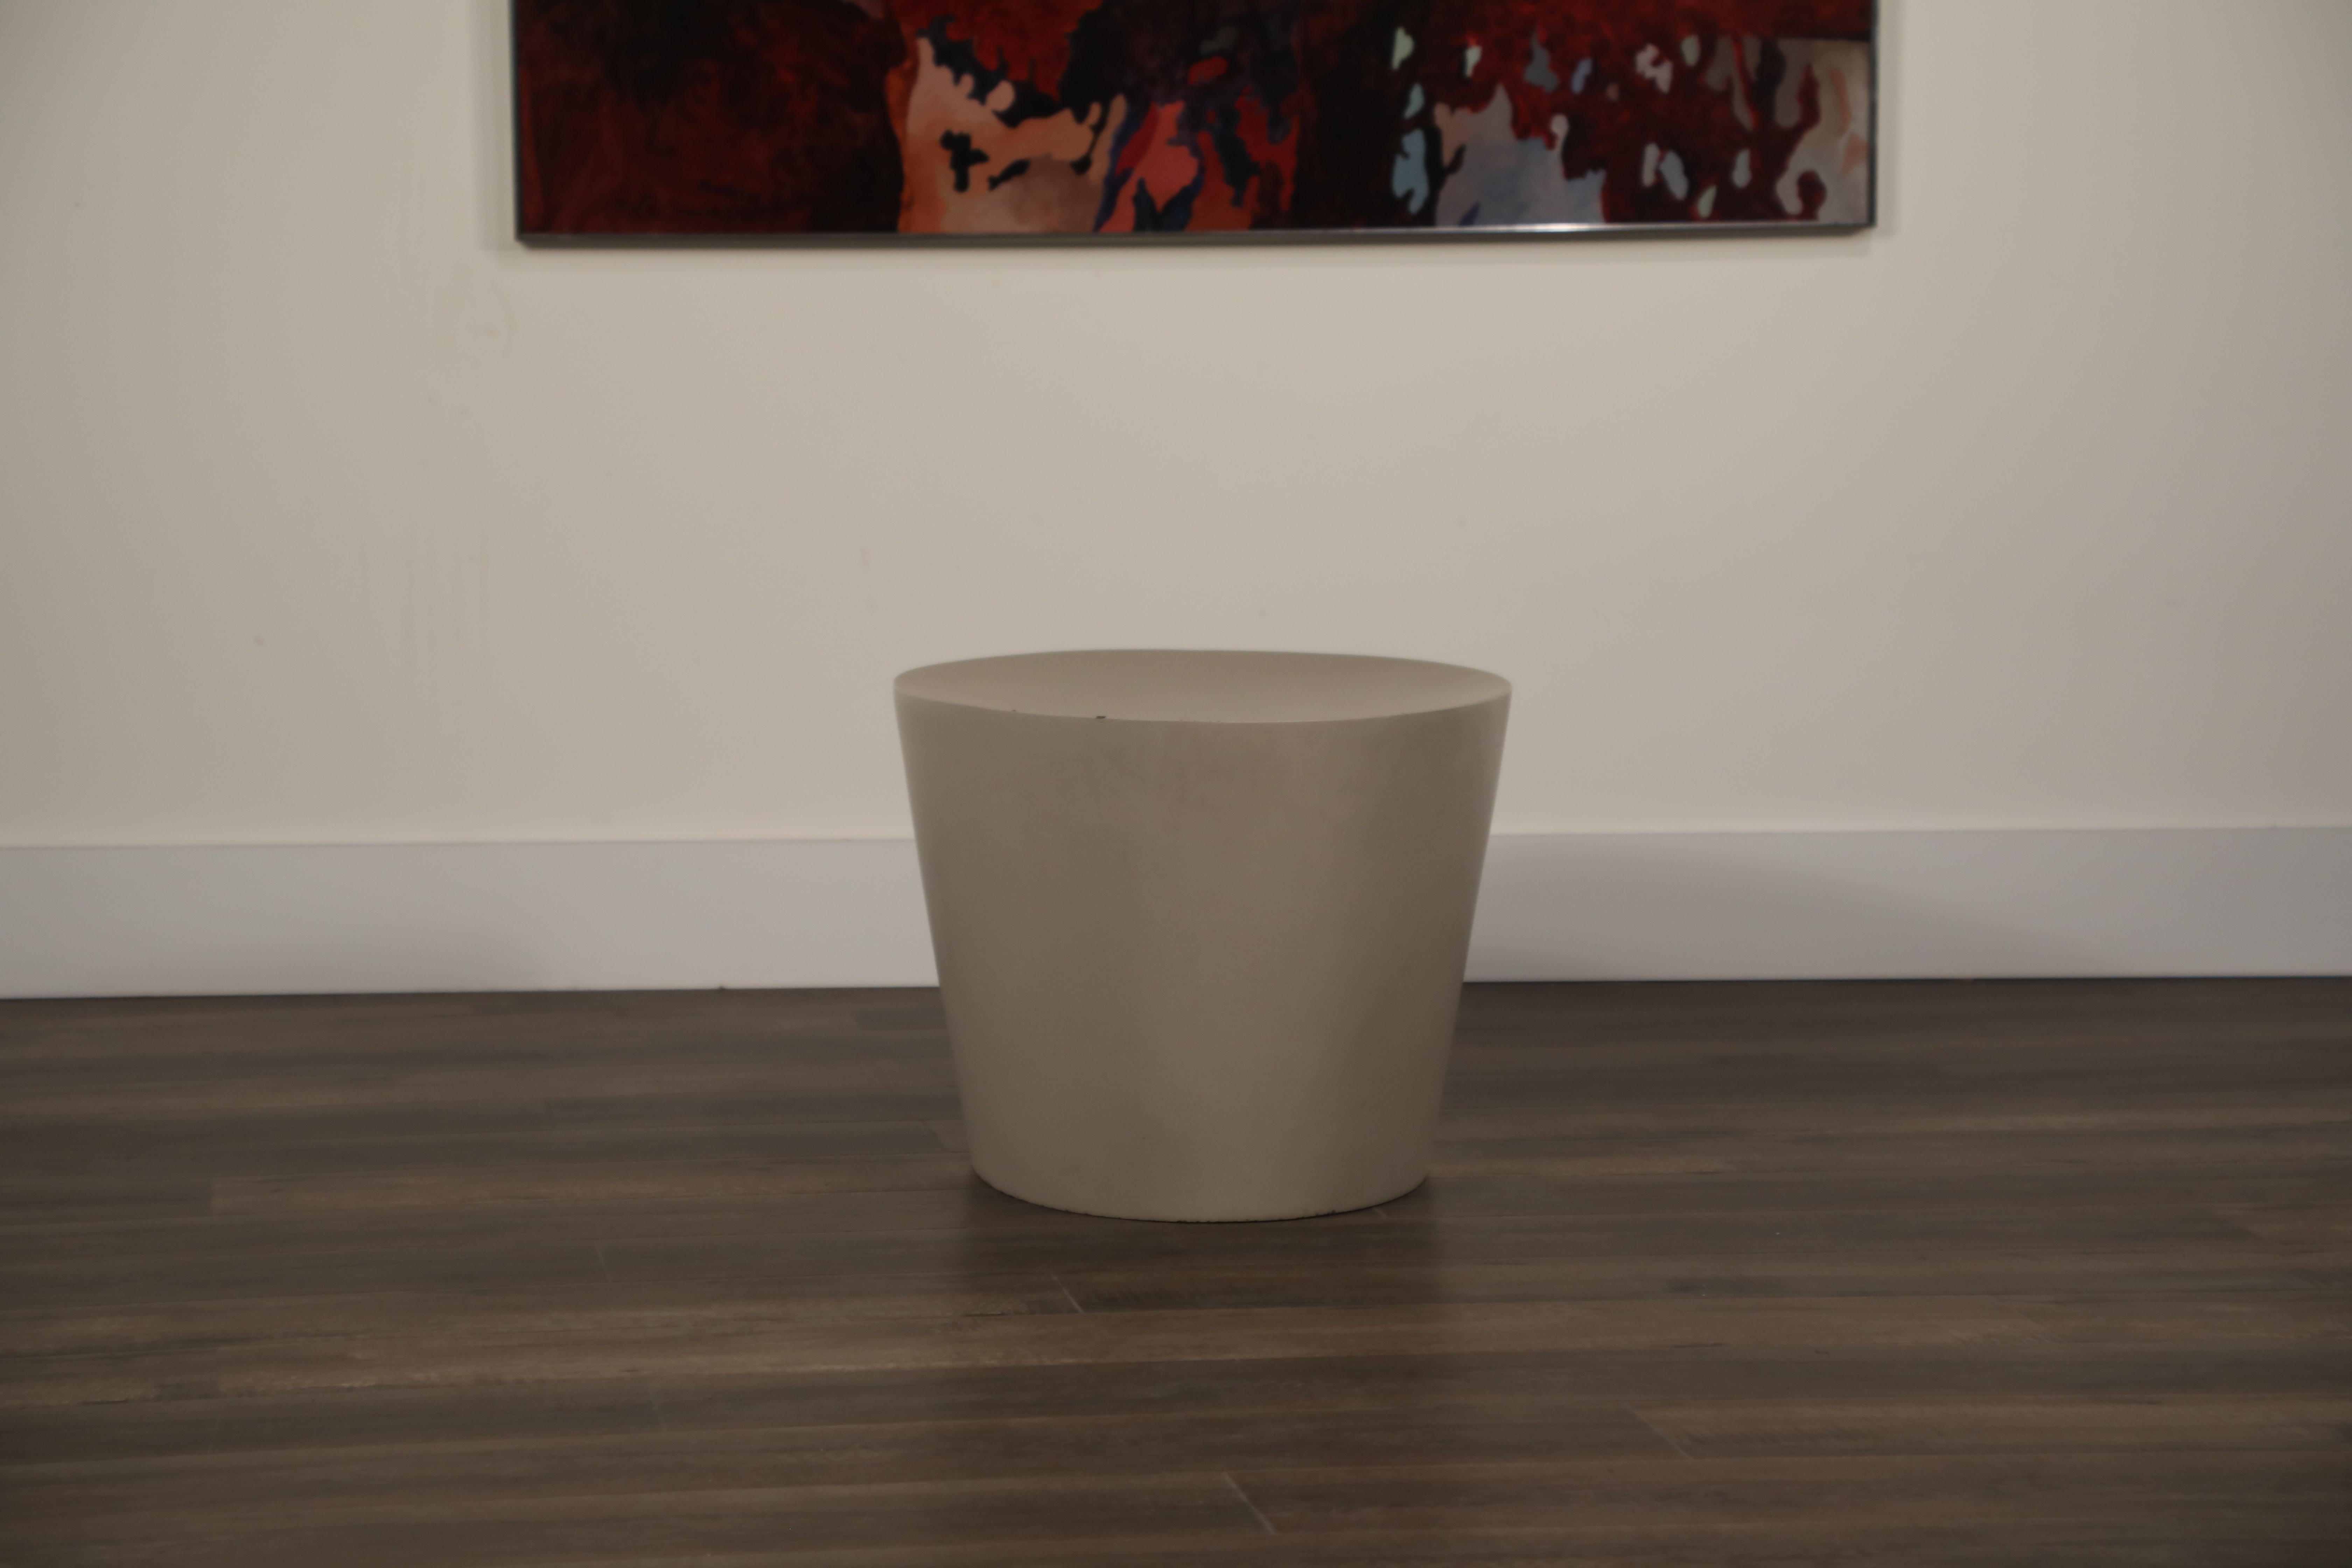 This first generation Maya Lin stool is no longer in production, making this fine example a rare and coveted collectors piece, and is fabricated of molded concrete, unlike the polyethylene (plastic) modern versions of today. This incredible example